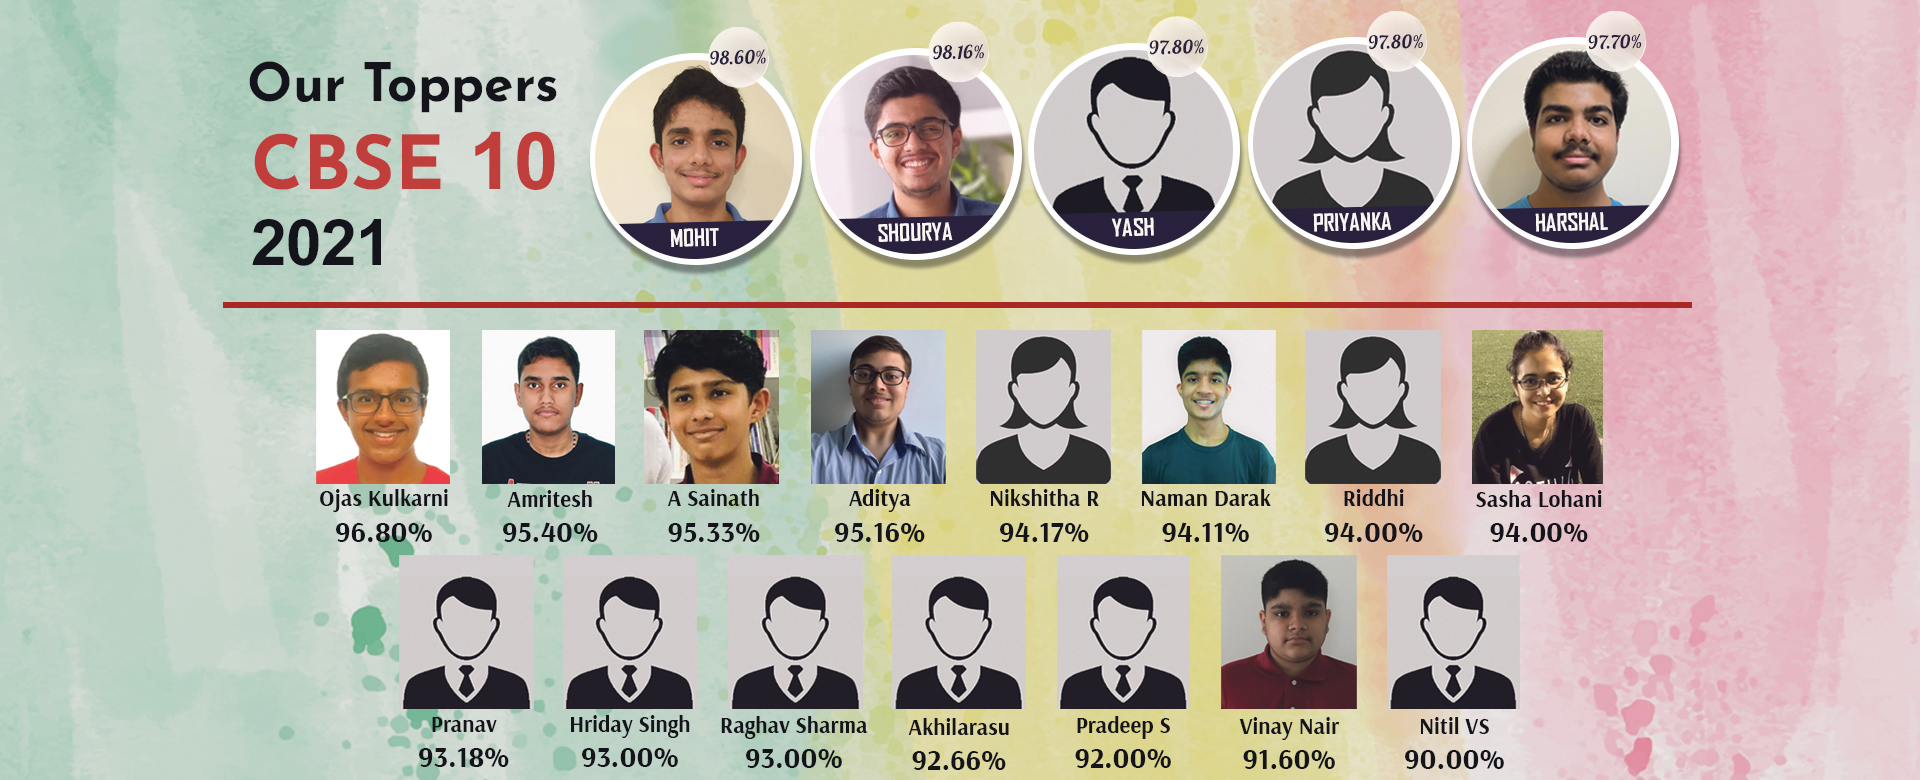 CBSE 10 Toppers 2021